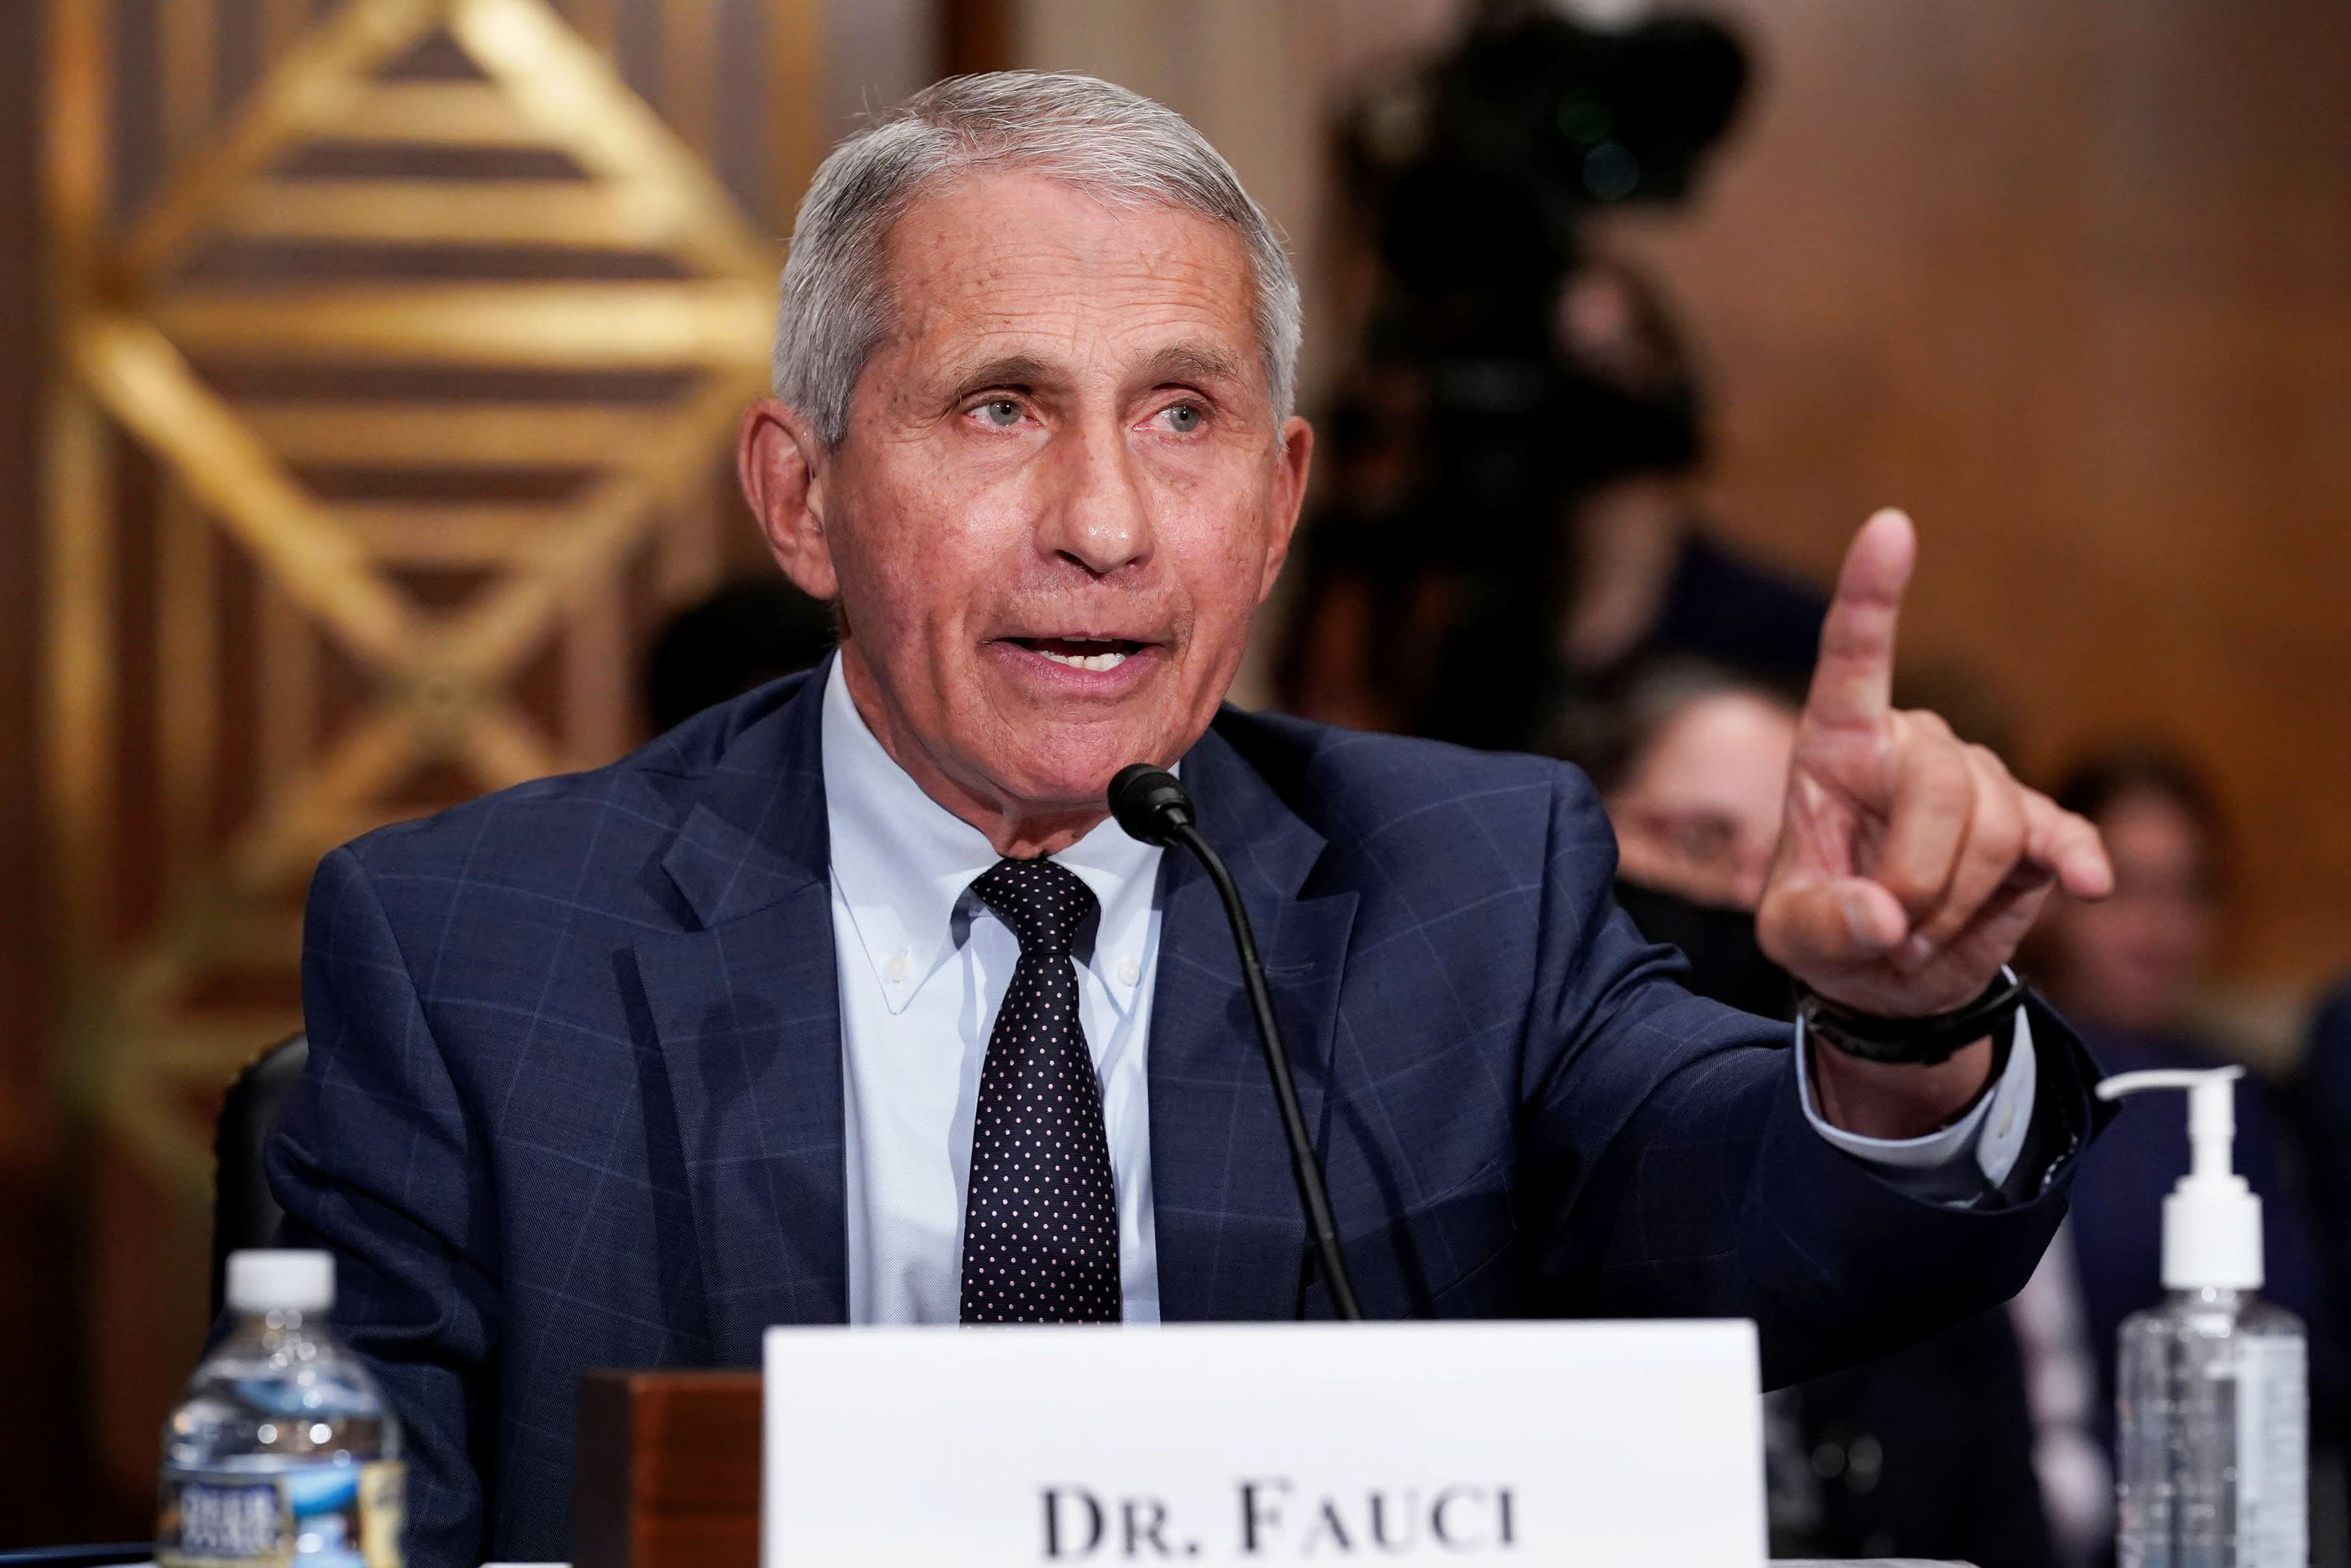 Fauci says vaccinated people ‘might want to consider’ wearing masks indoors as delta variant surges in U.S.